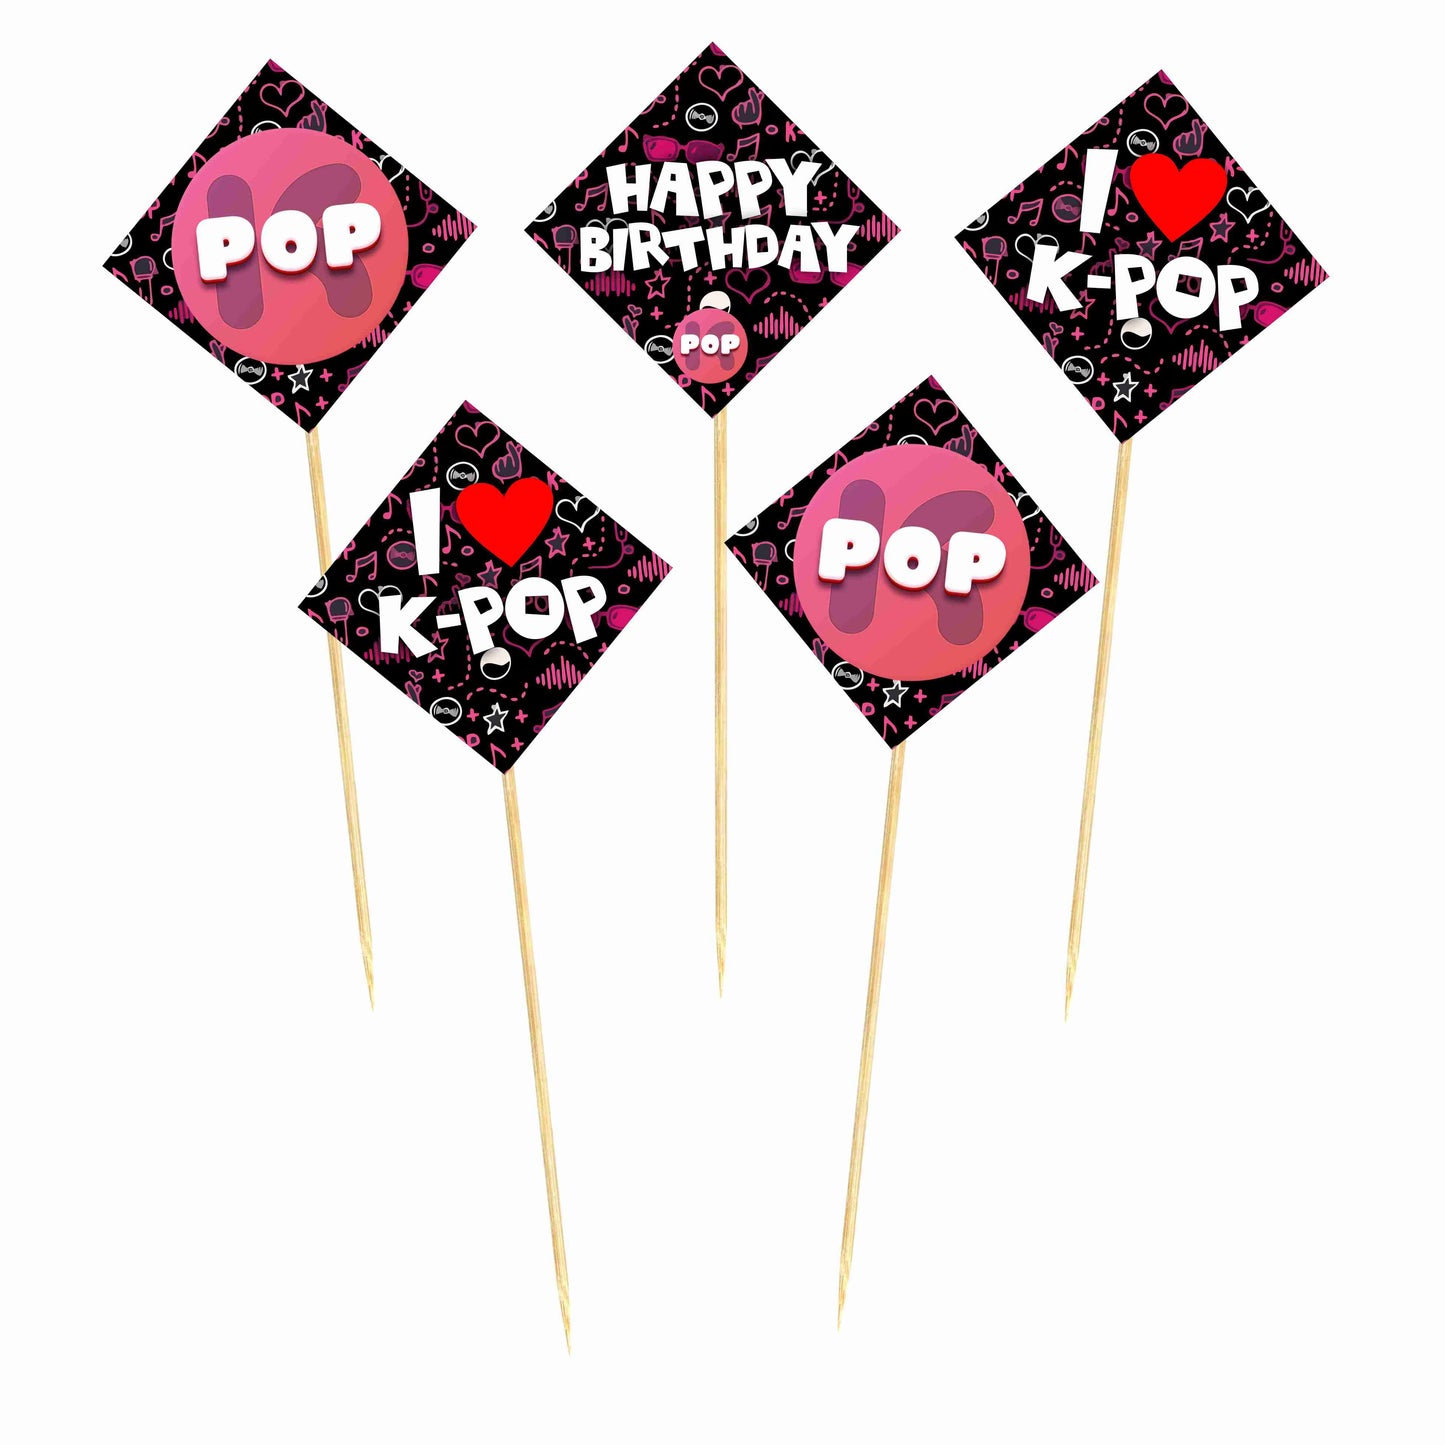 Kpop Theme Cake Topper Pack of 10 Nos for Birthday Cake Decoration Theme Party Item For Boys Girls Adults Birthday Theme Decor